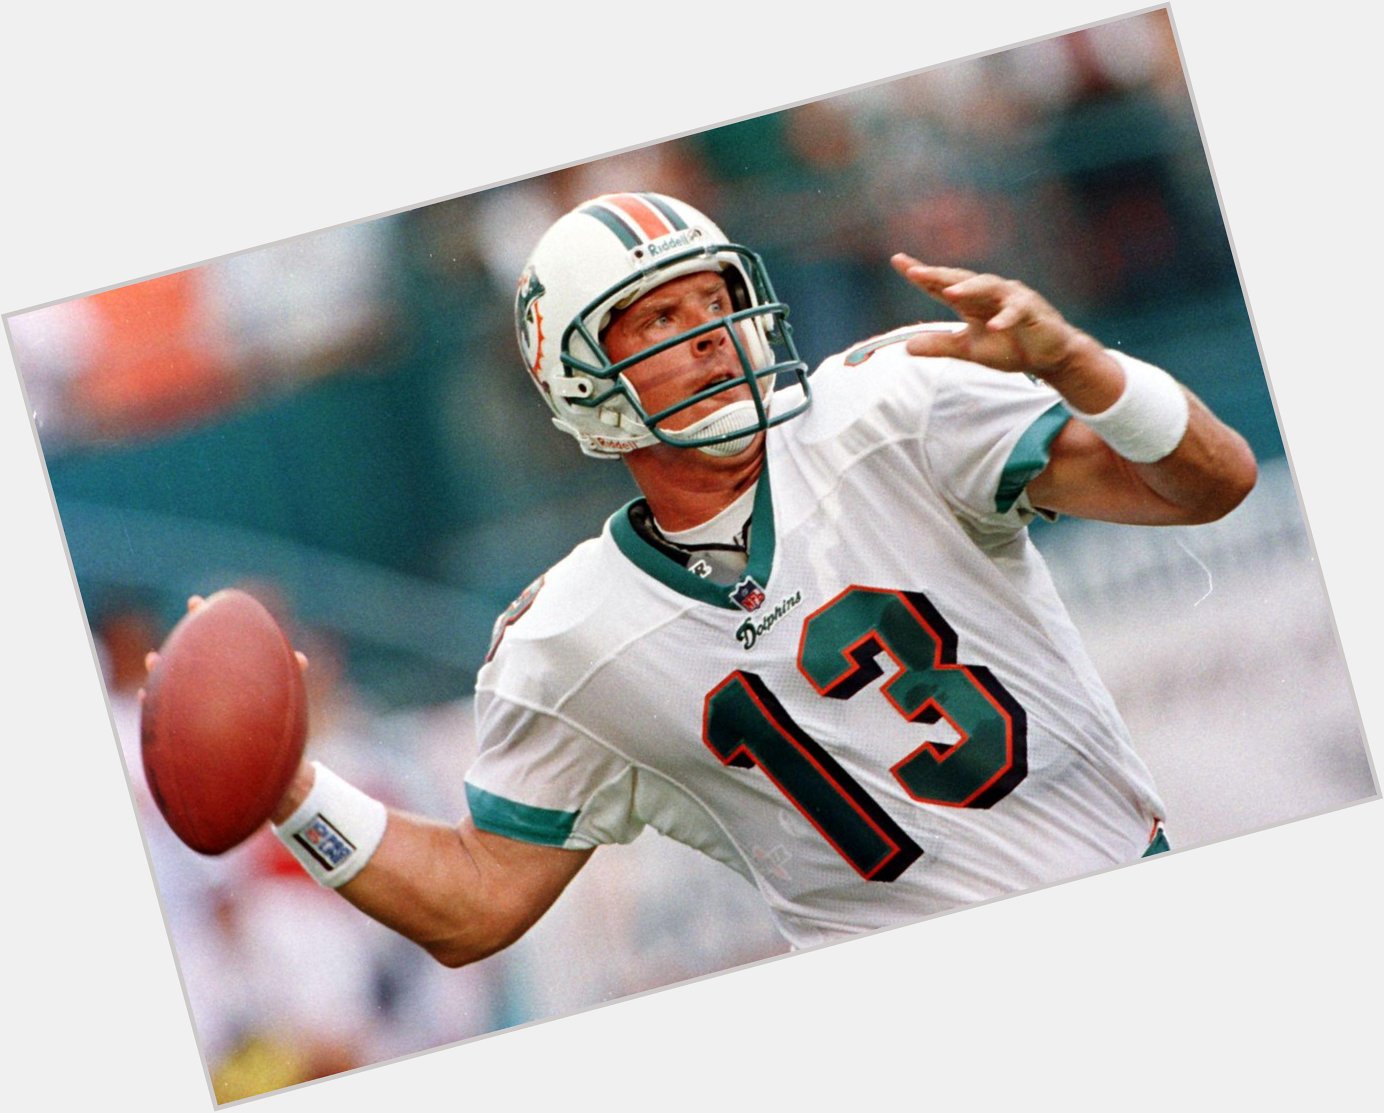 Happy 54th birthday to Dan Marino. The 9x Pro-Bowler held the passing TDs record (420) until he was passed by Favre. 